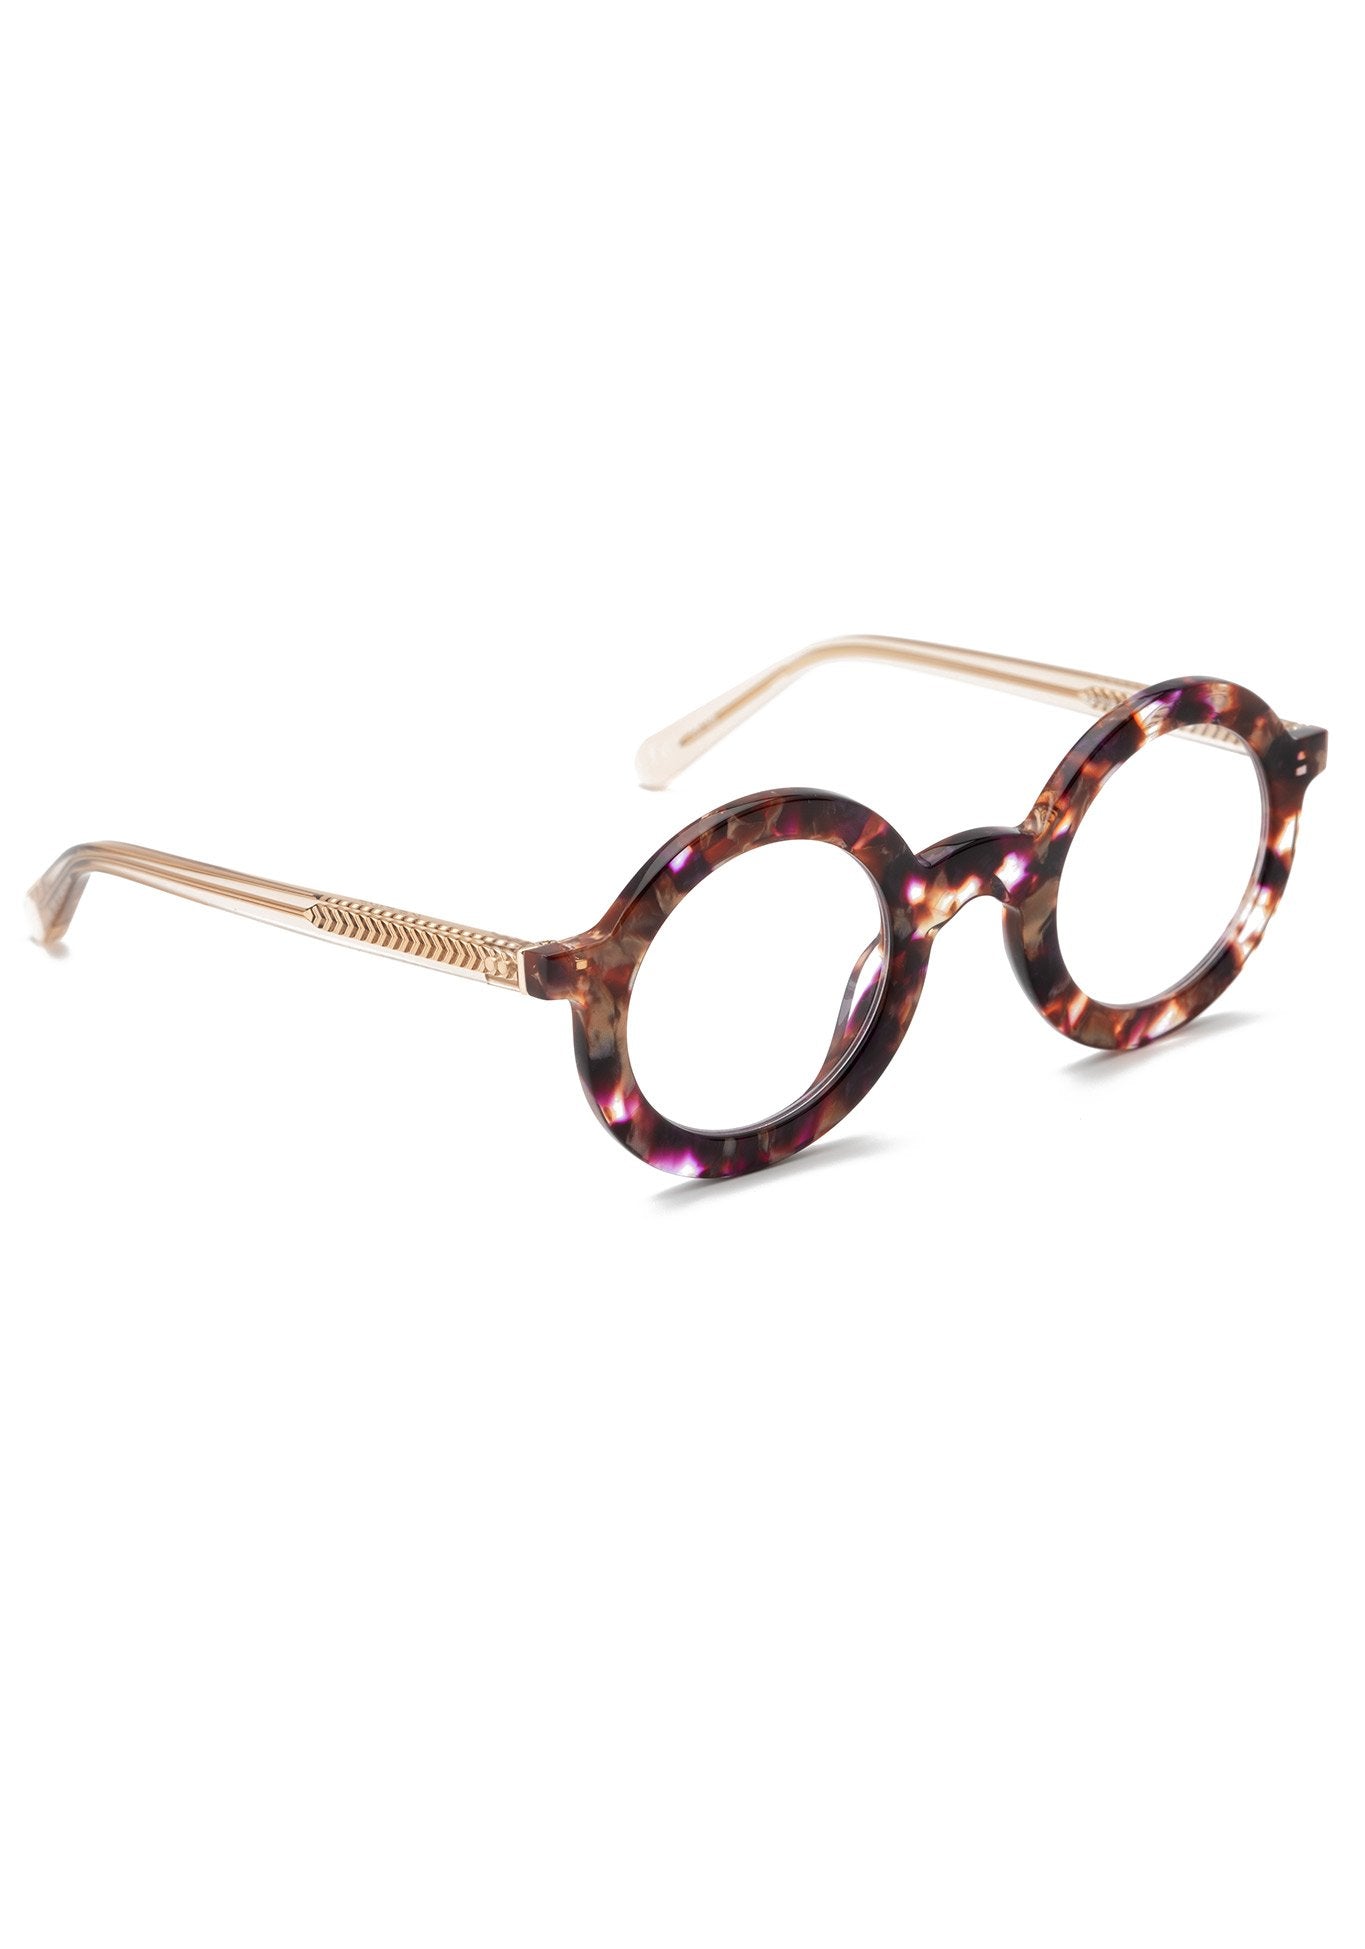 KREWE - HURST | Stardust Handcrafted, Luxury Pink and Red Acetate Eyeglasses